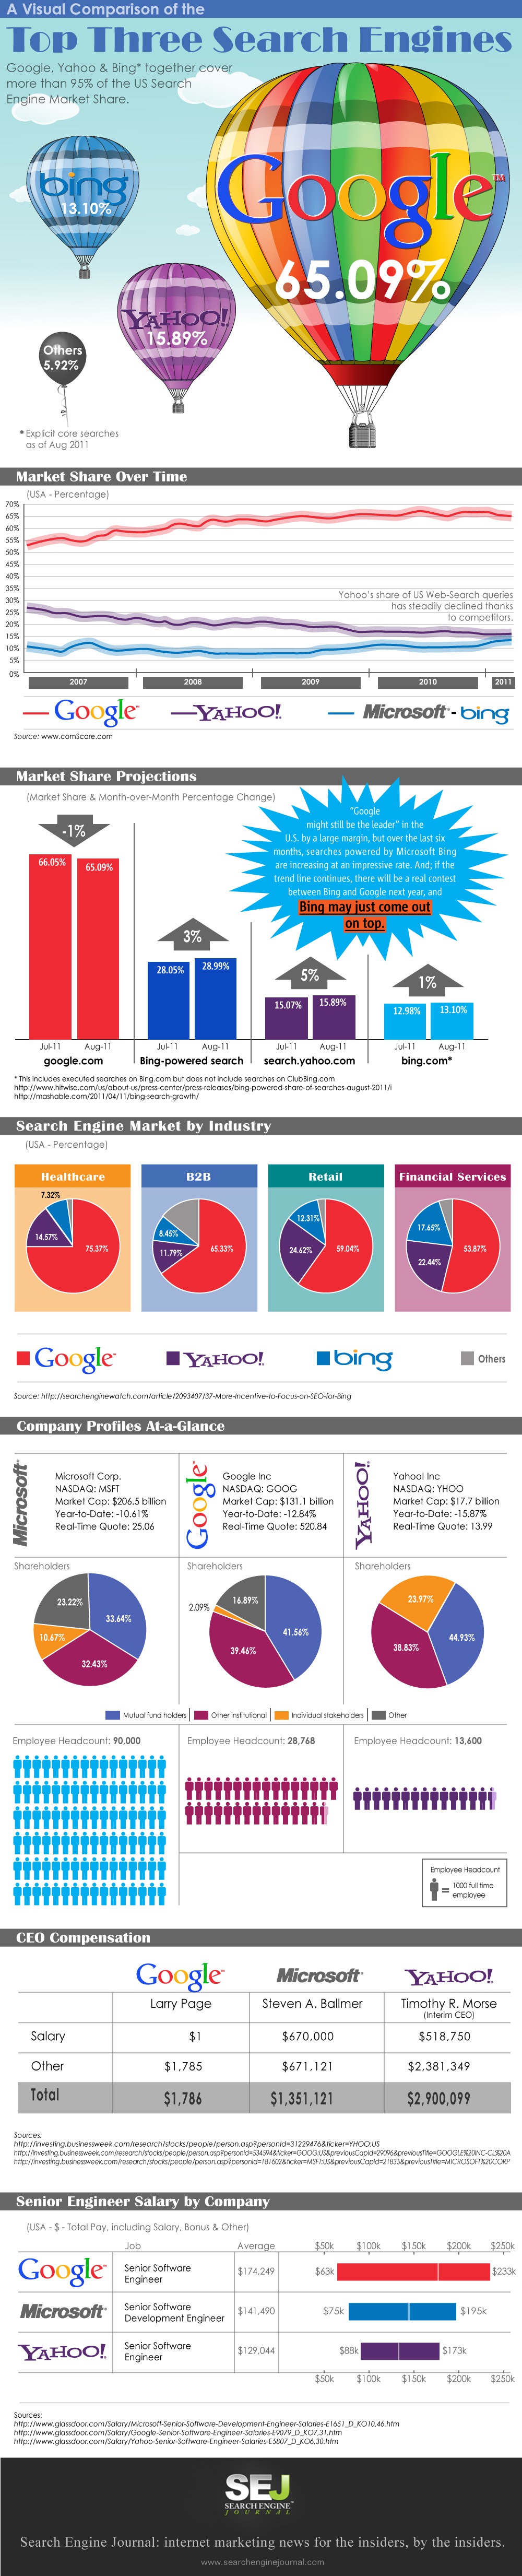 Comparison of the Top Three Search Engines: Bing+Yahoo > Google? [INFOGRAPHIC]